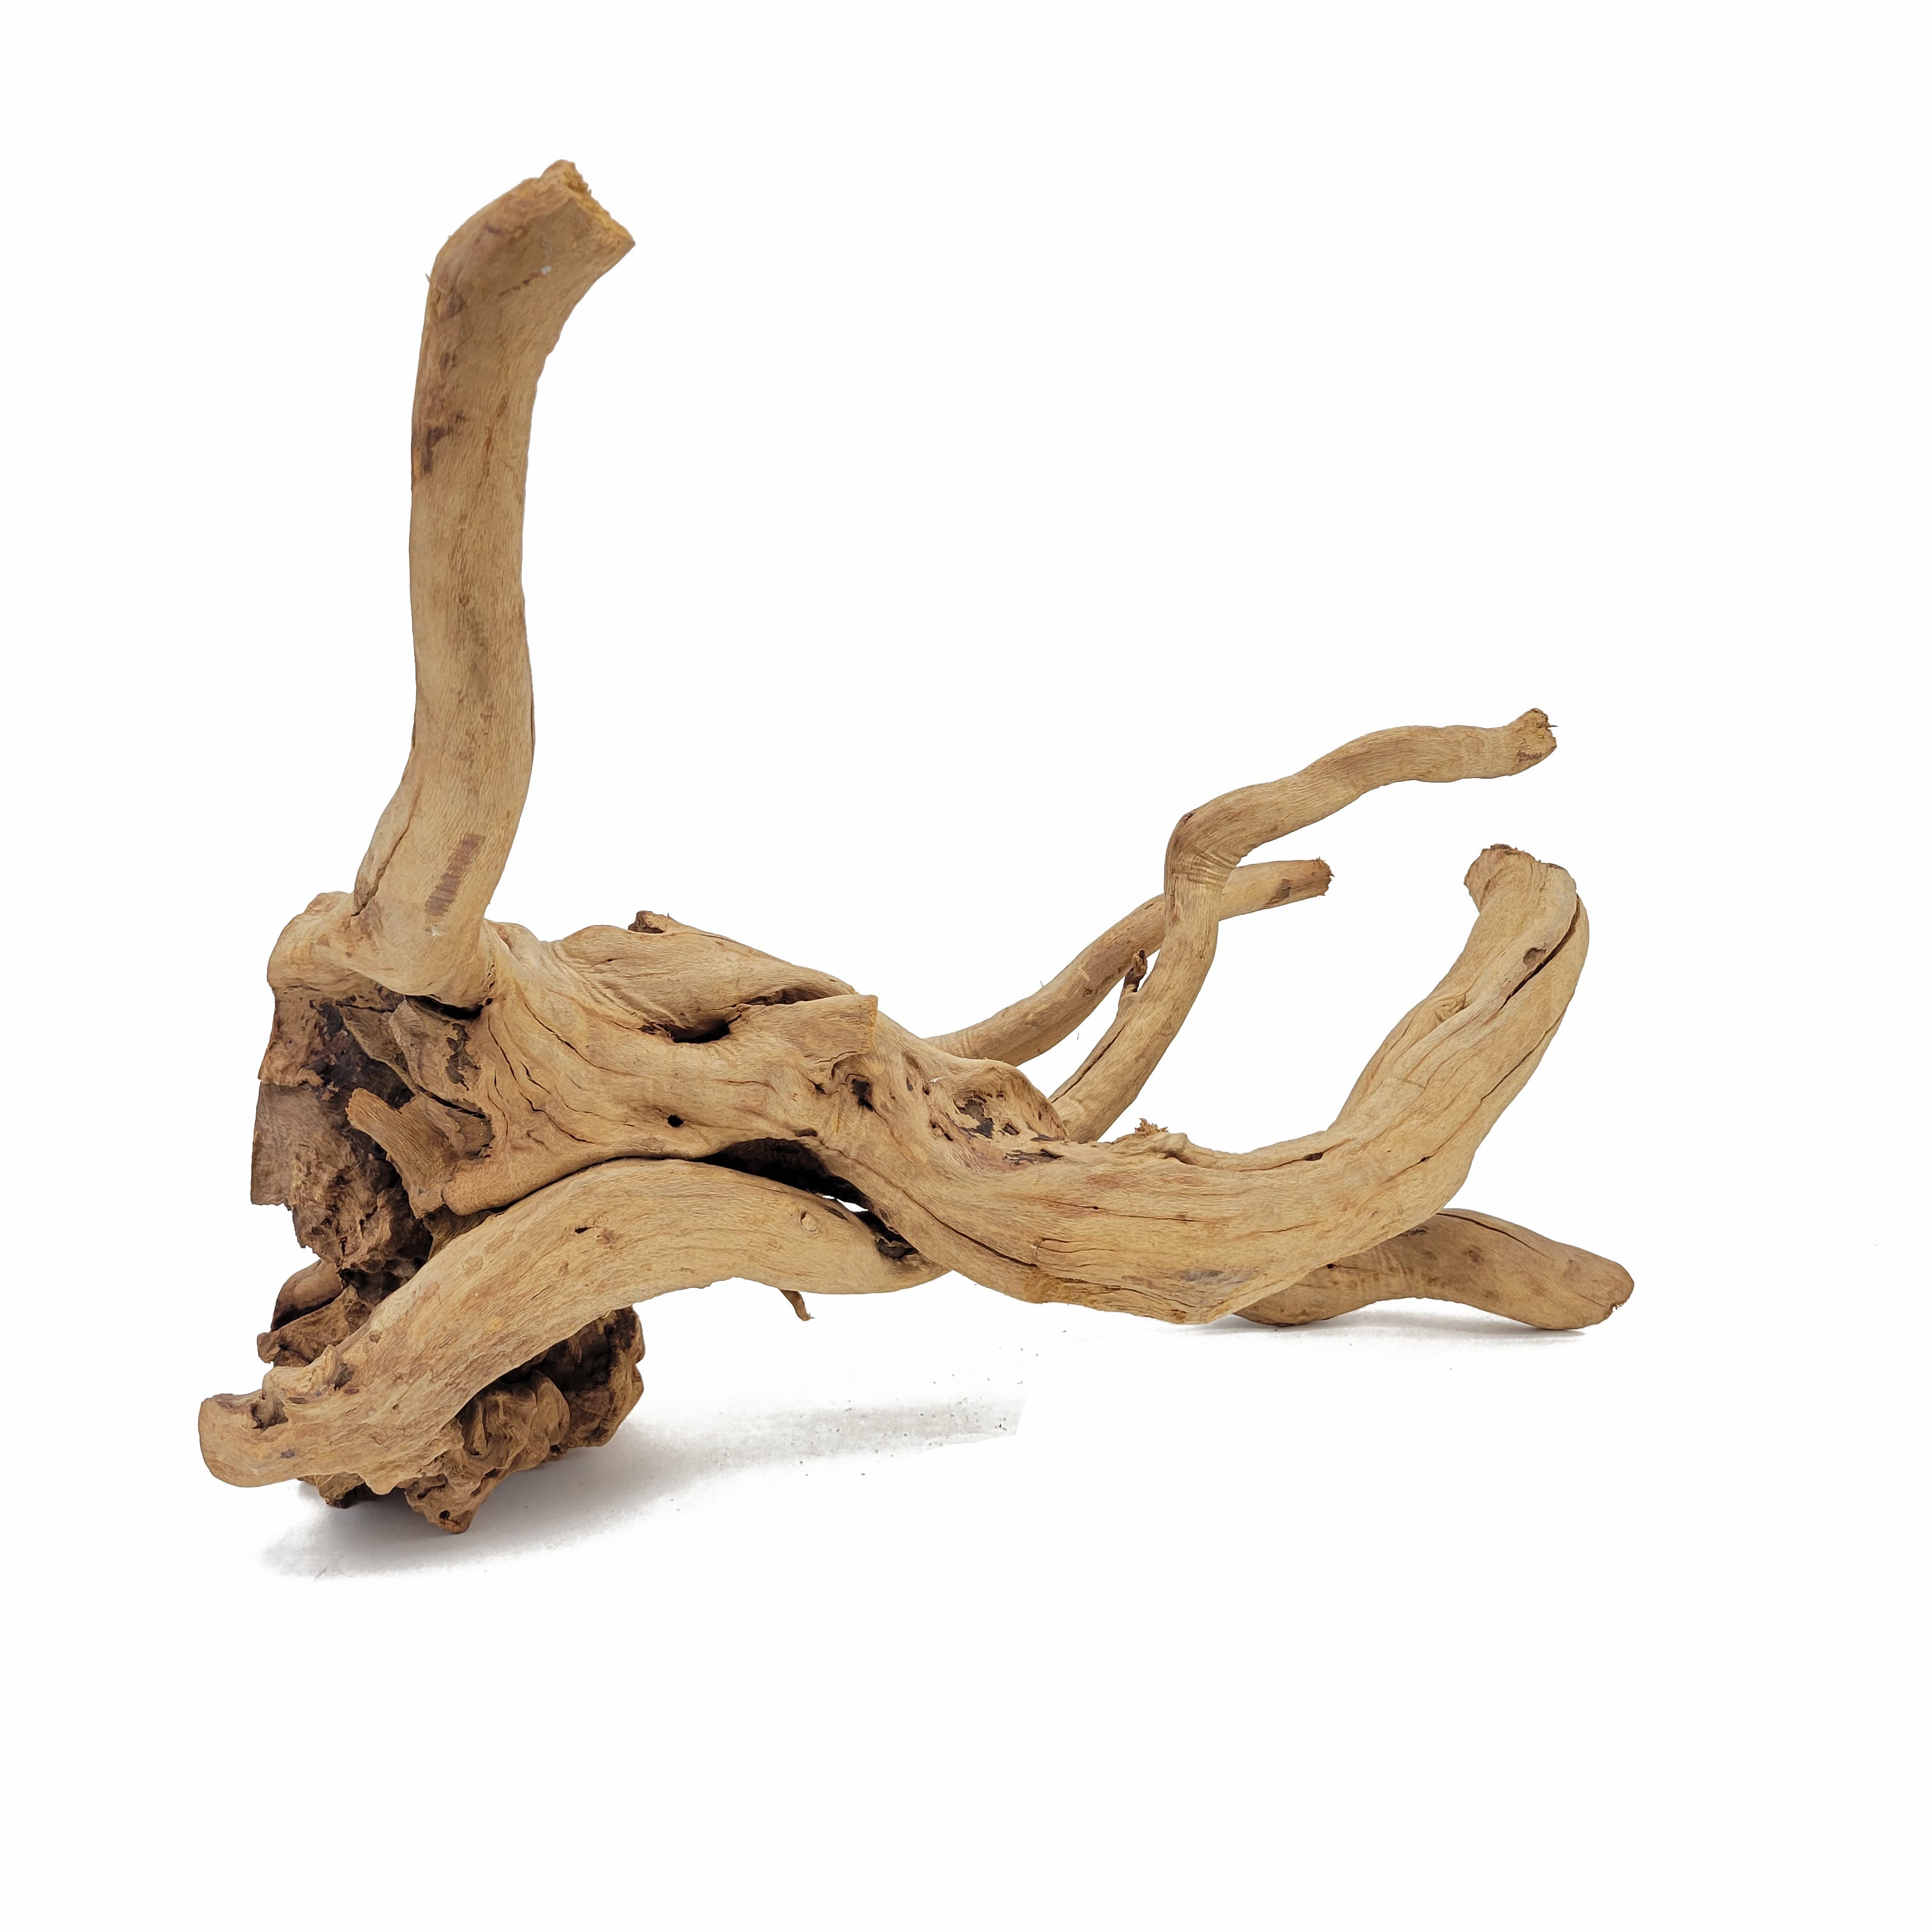 Spider Wood / Cuckoo Root - Approximate Size 12-23 - Lifegard